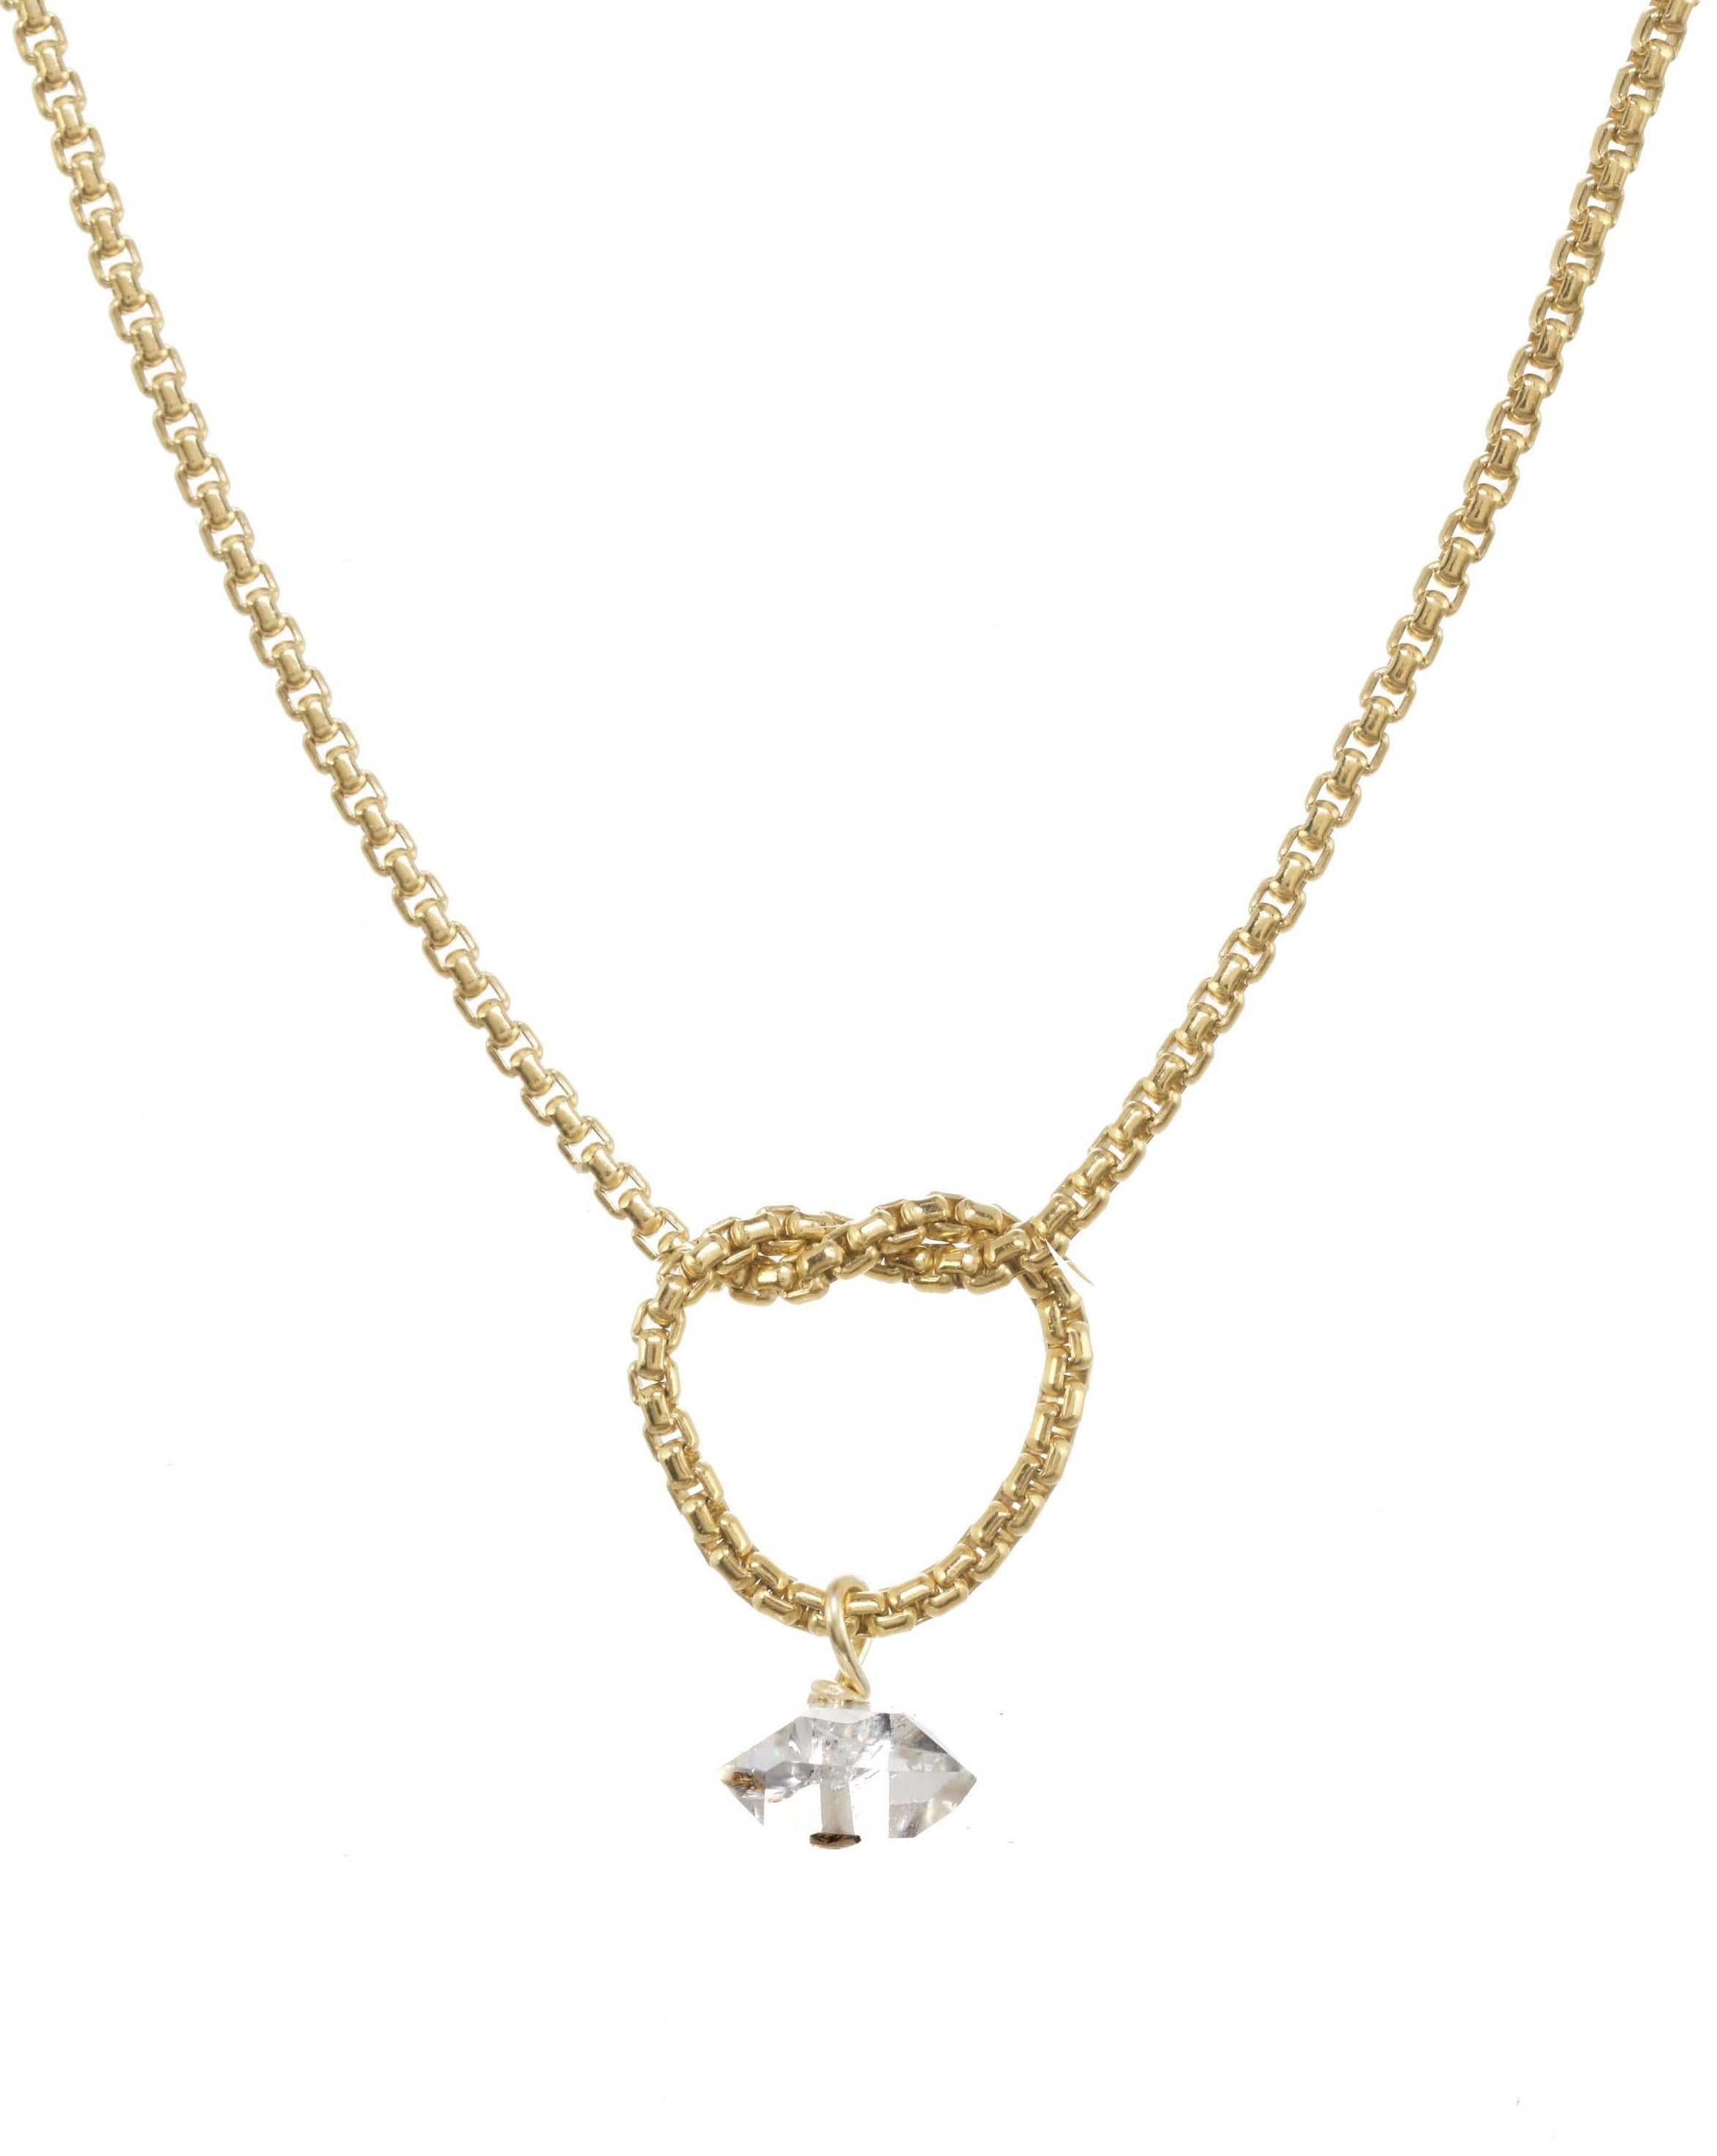 Love Knot Necklace by KOZAKH. A 16 to 18 inch adjustable length necklace, crafted in 14K Gold Filled, featuring a knot and a faceted Herkimer Diamond.